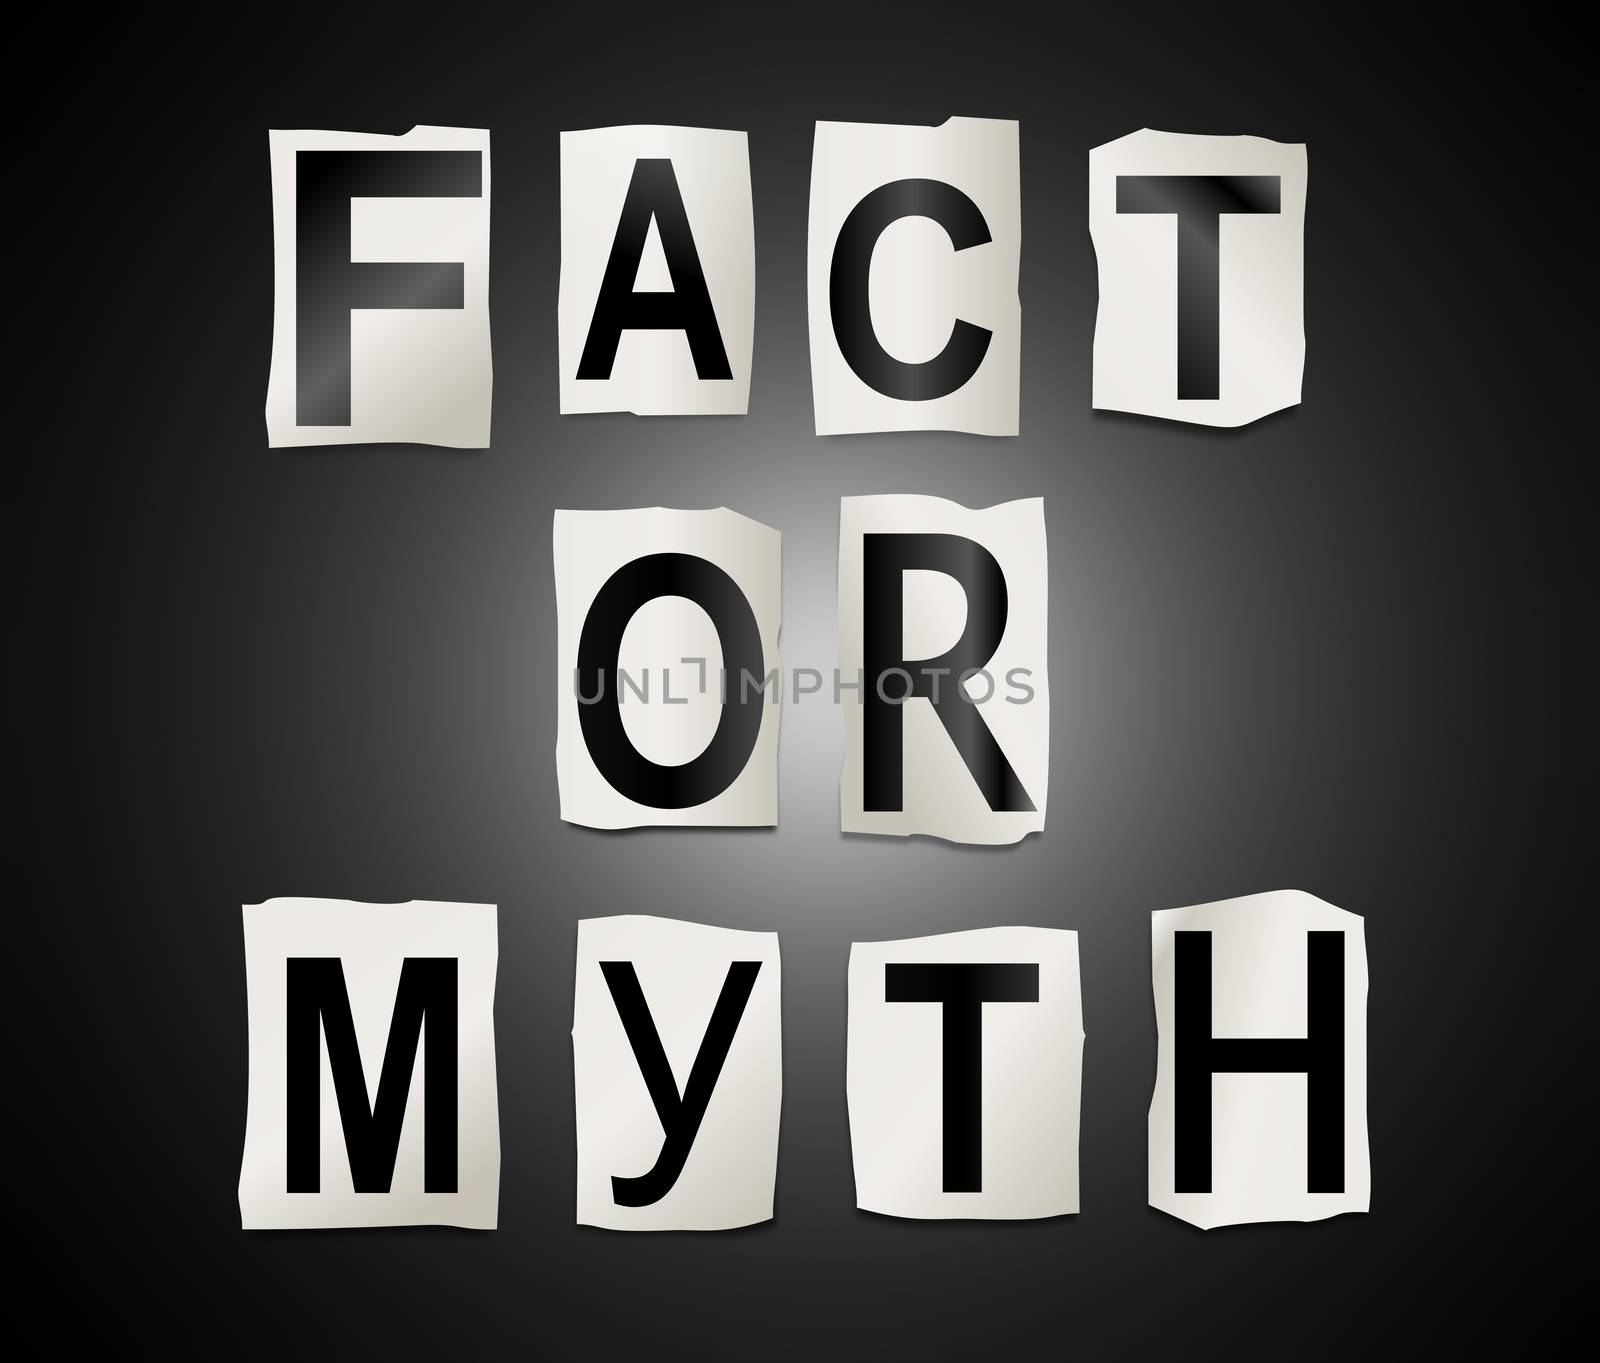 Illustration depicting a set of cut out printed letters arranged to form the words fact or myth.